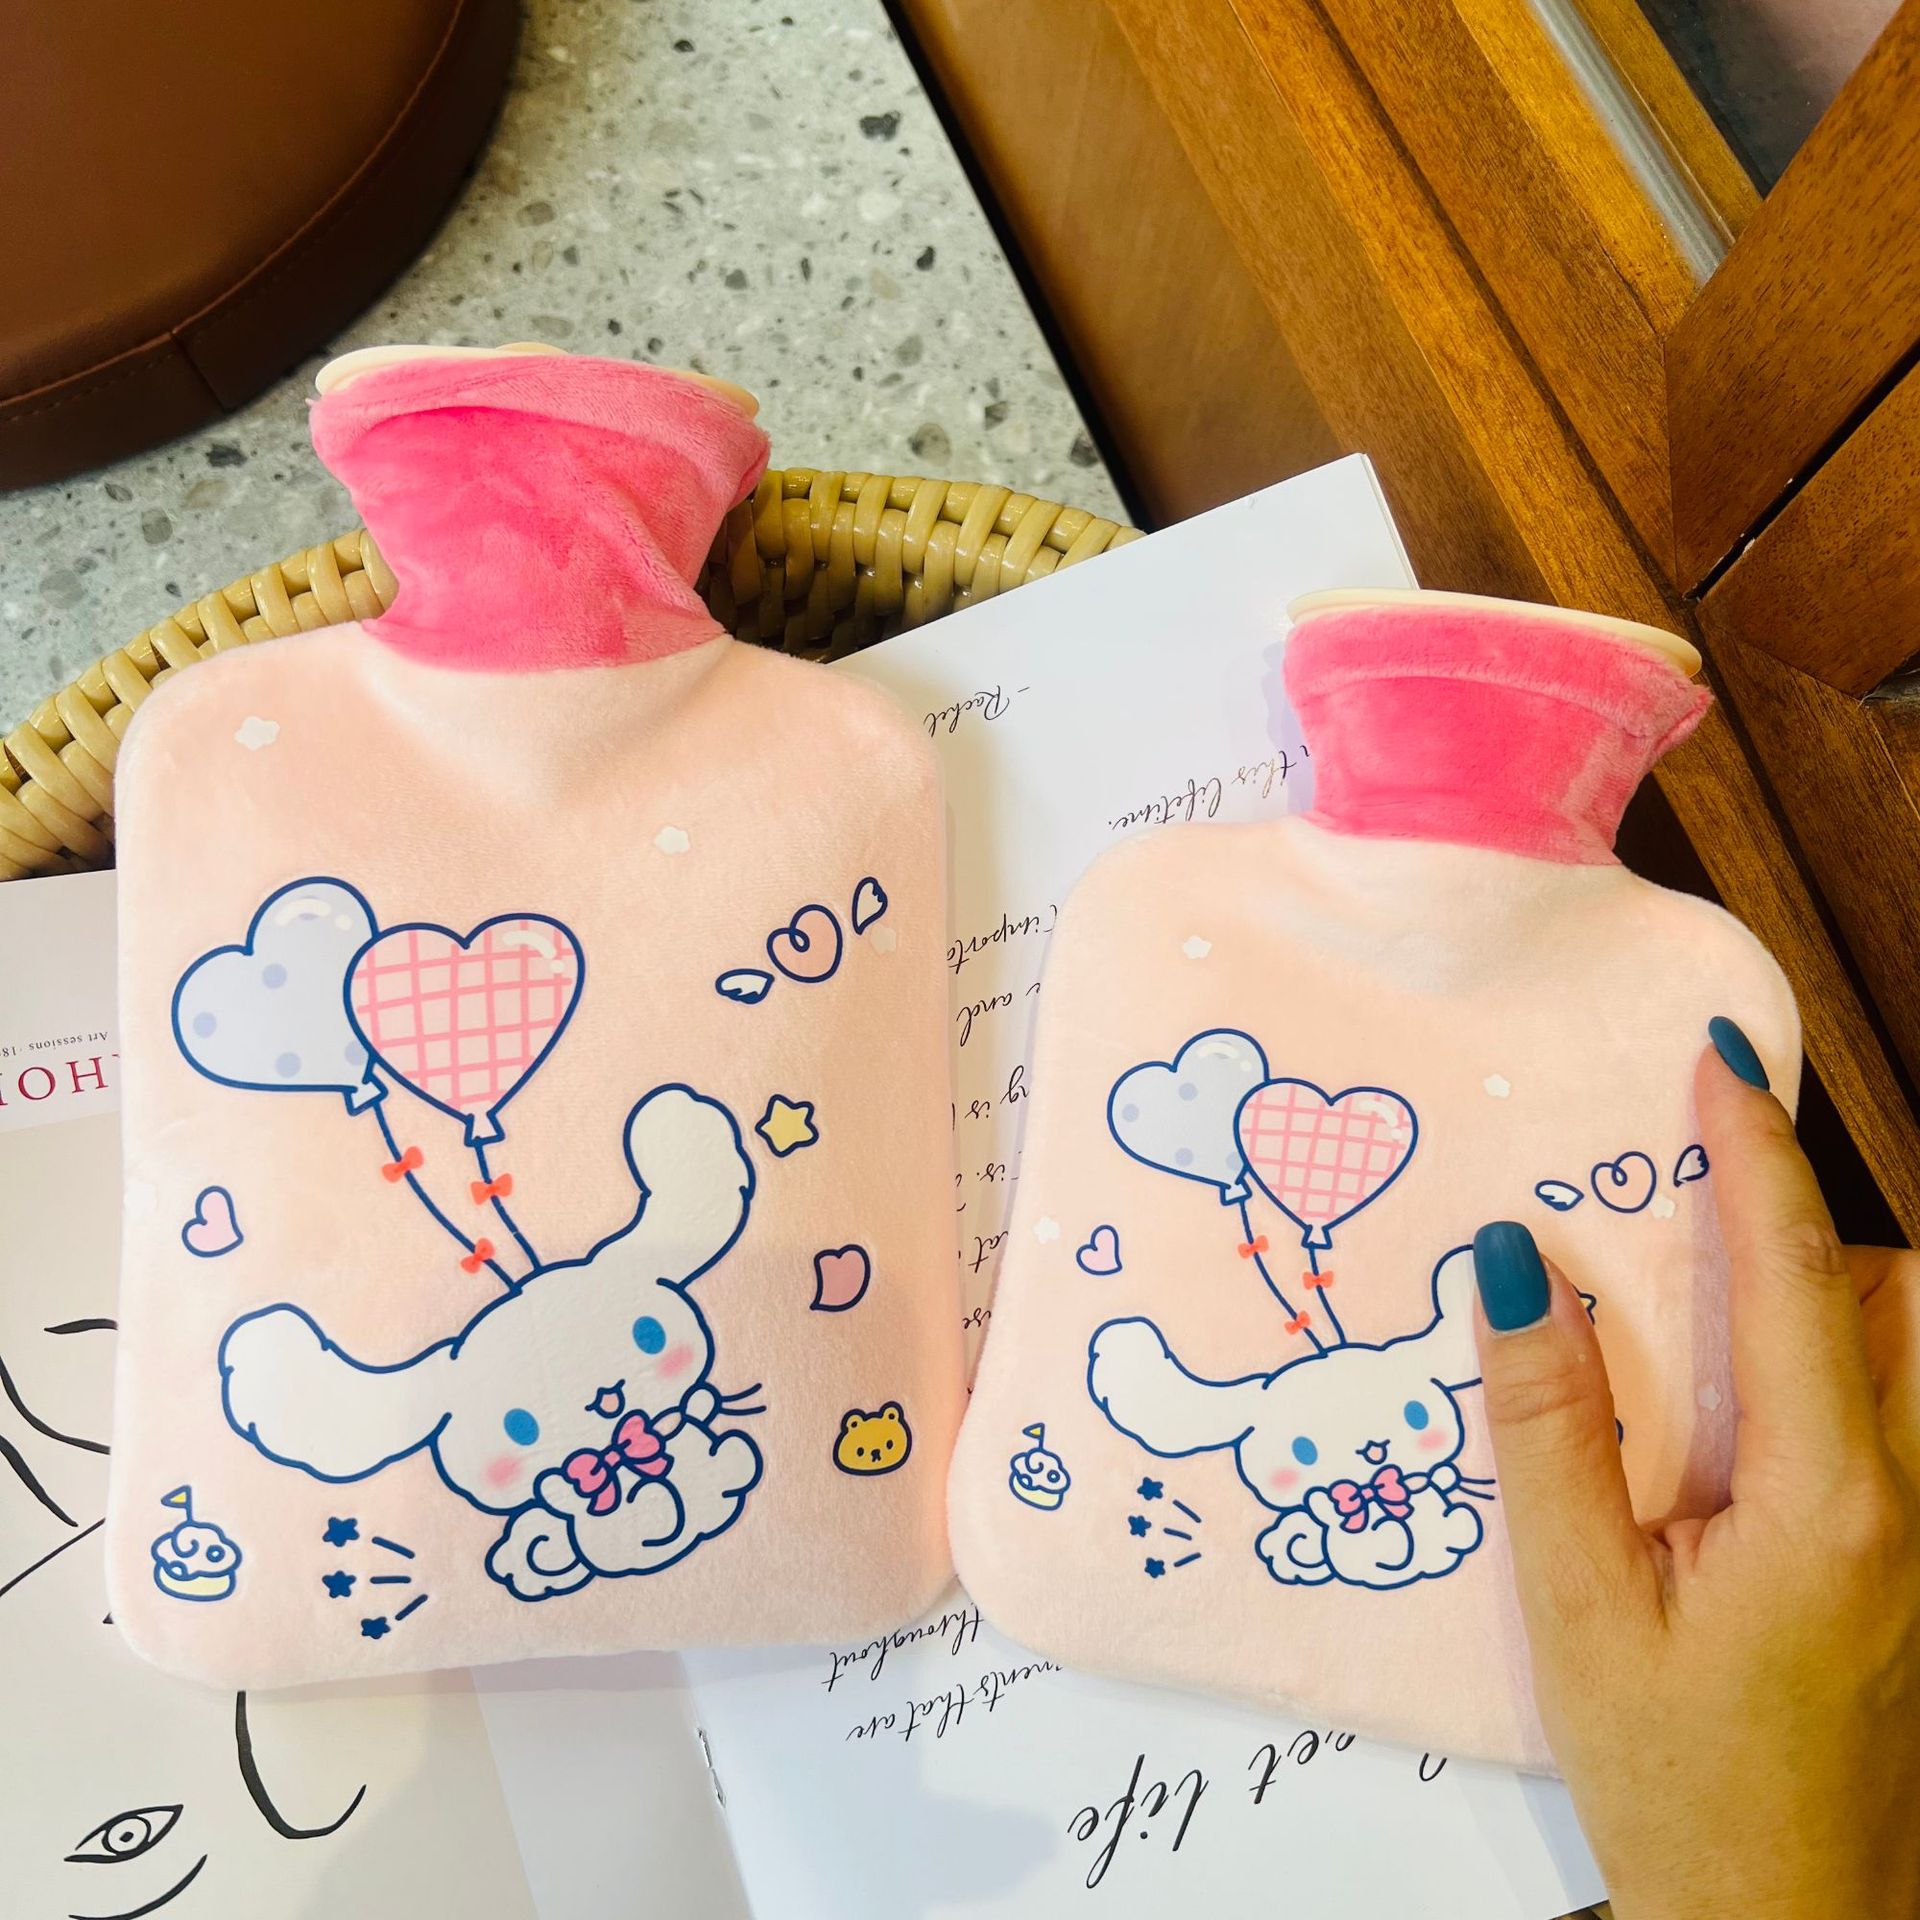 Hot Water Injection Bag Cream Dog Cartoon Cute Style Hot-Water Bag Female Student Hot Compress Belly Removable and Washable